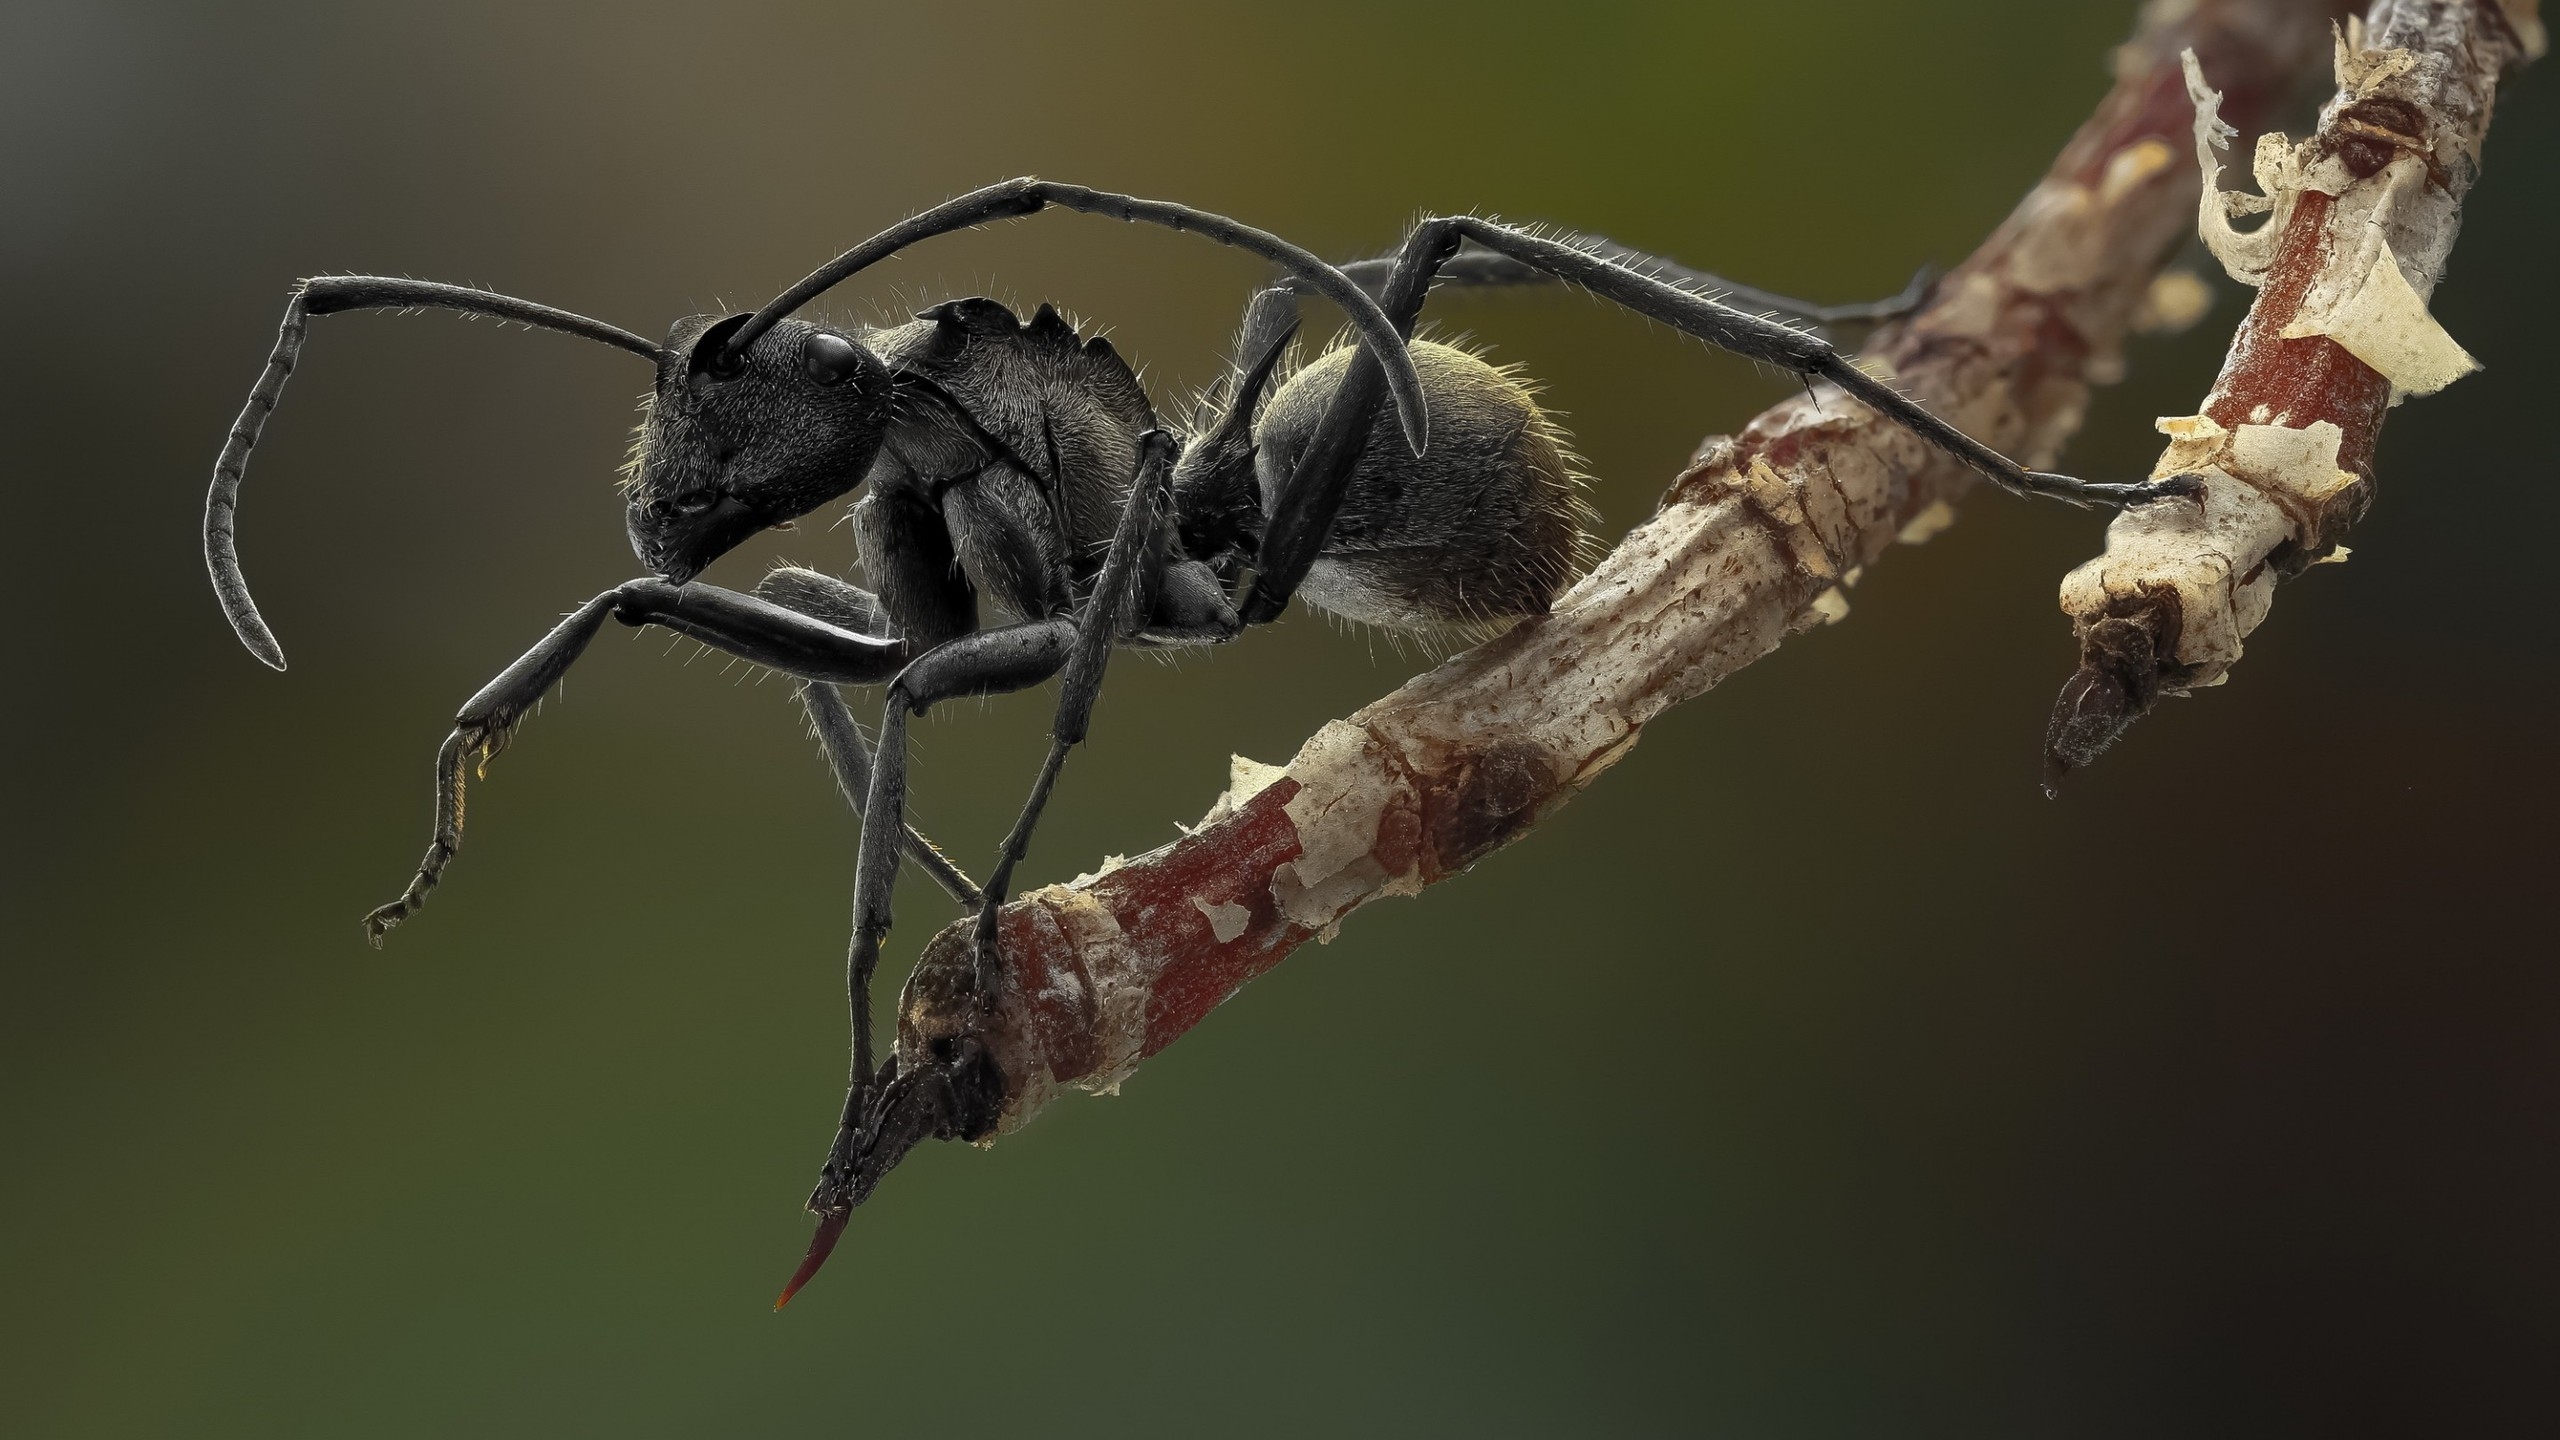 Ant Macro Photography for 2560x1440 HDTV resolution